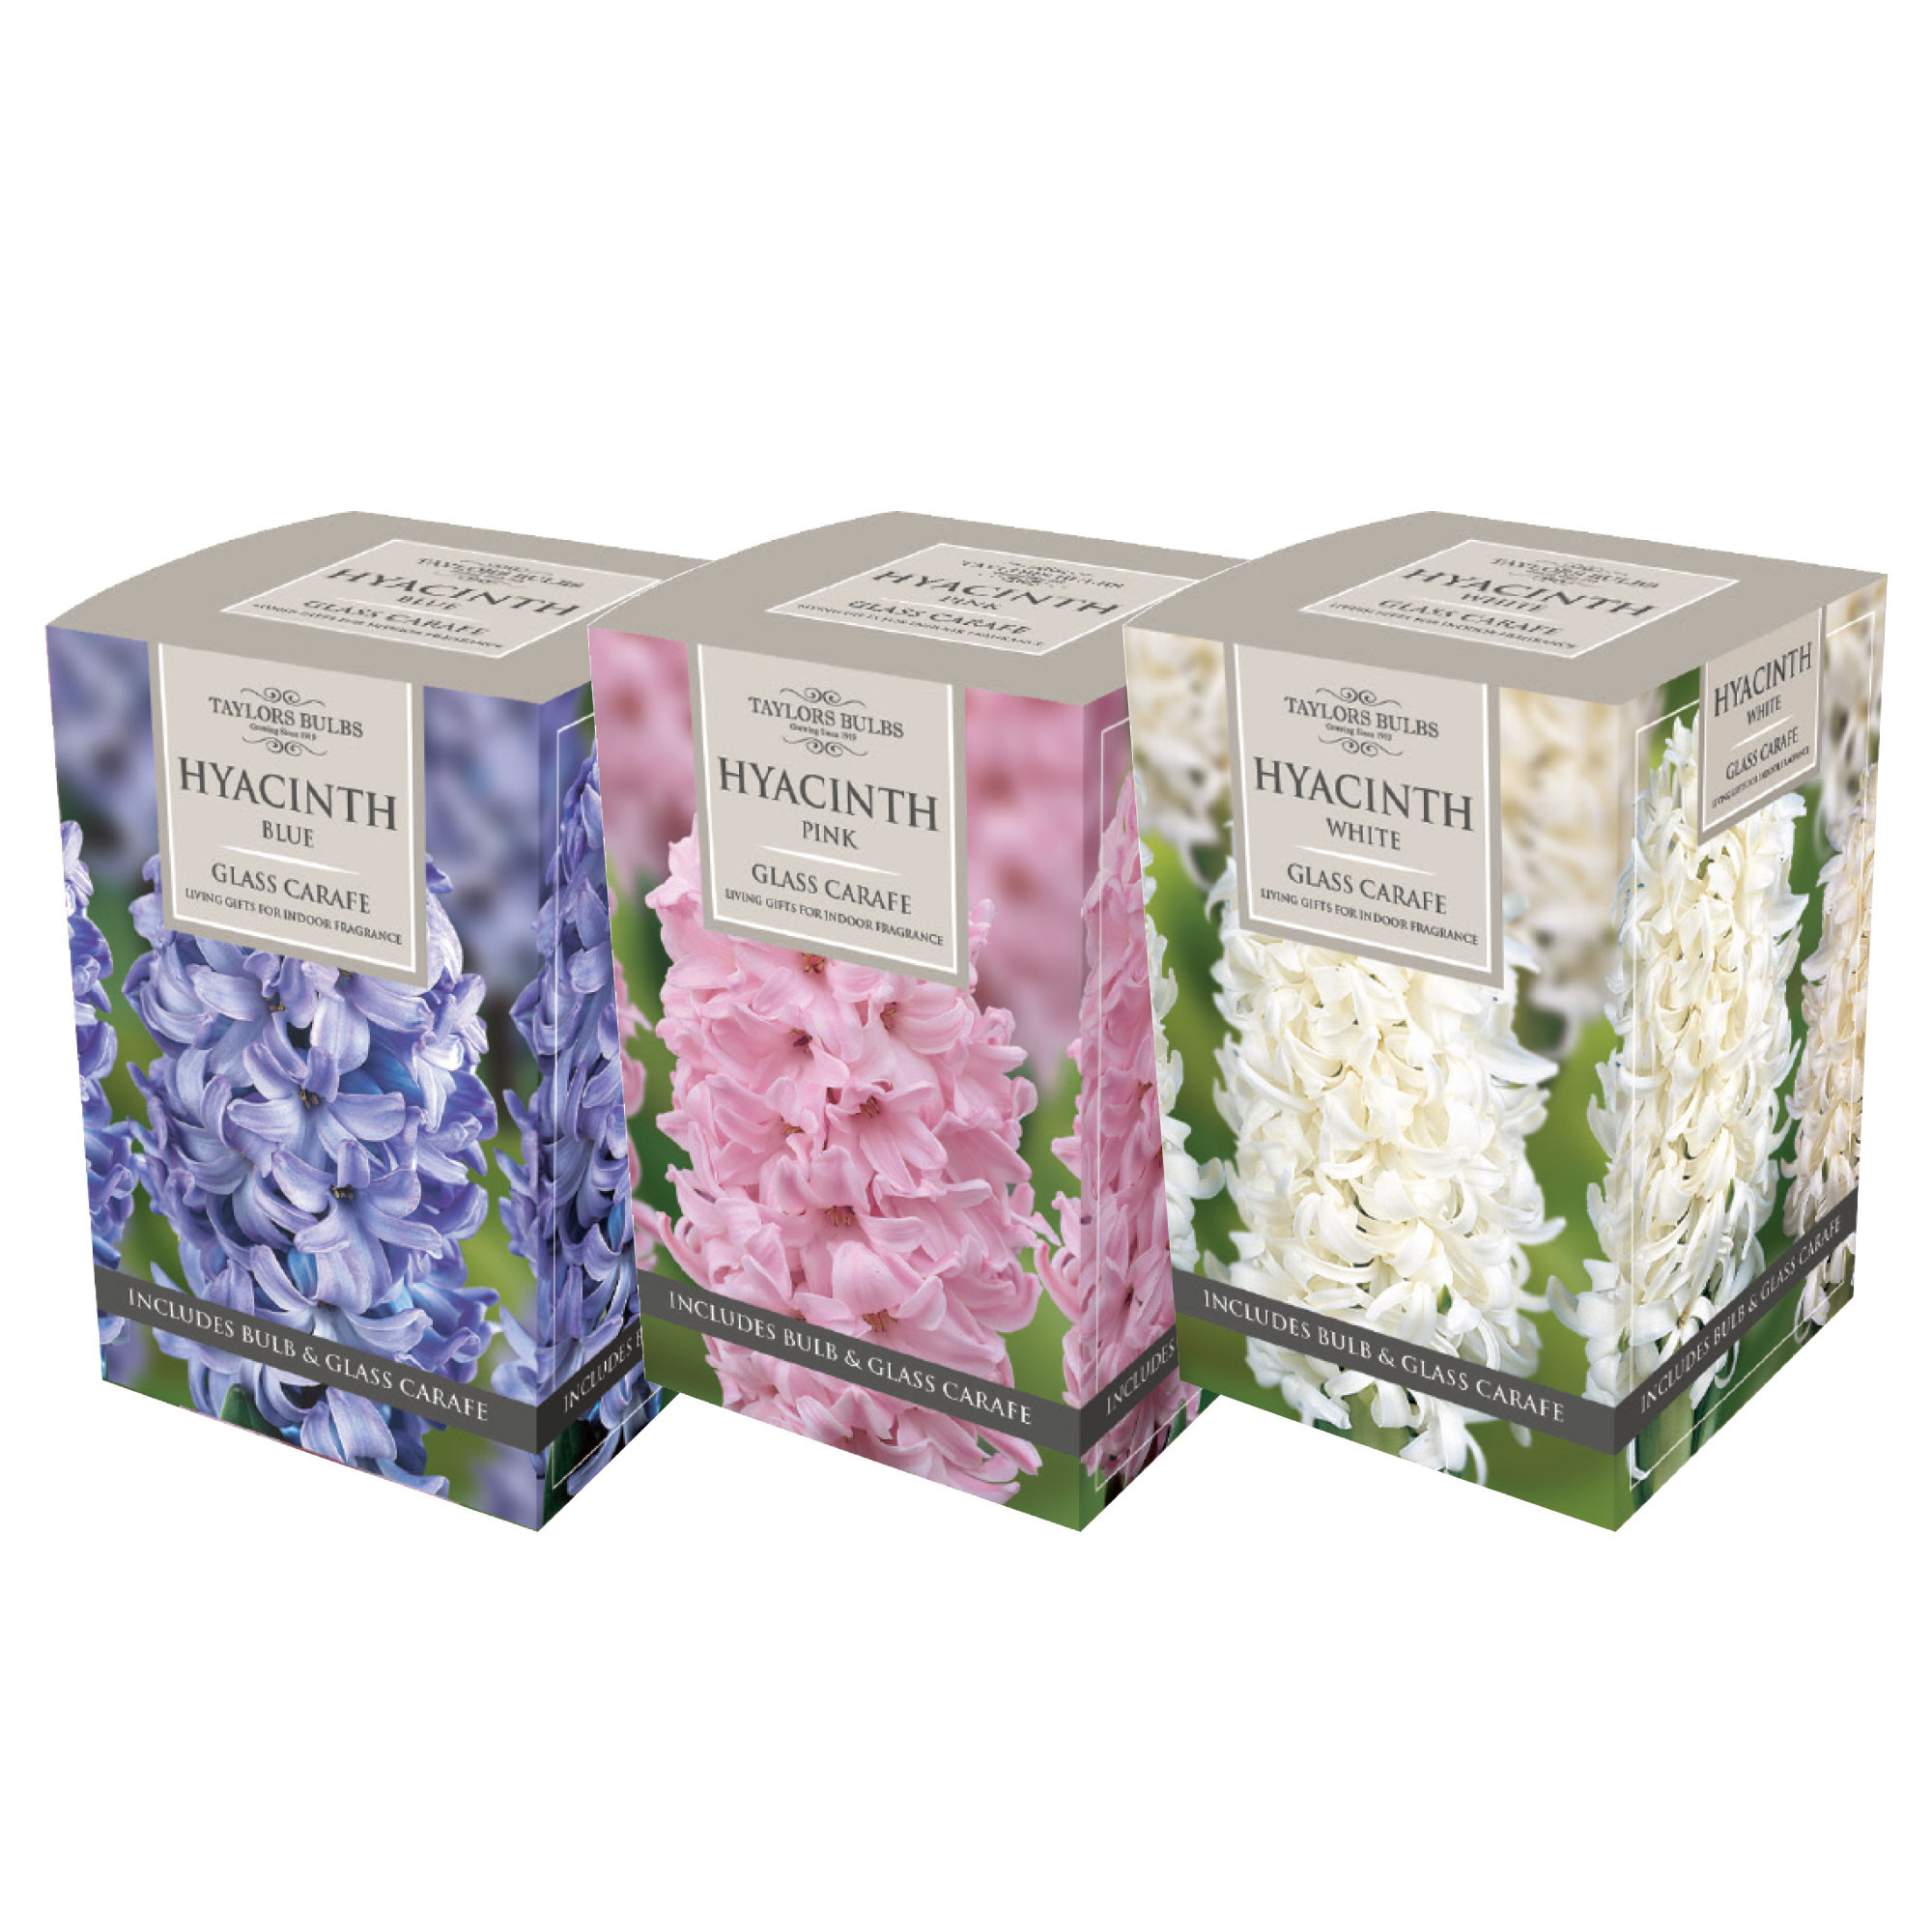 28 Awesome Glass Hyacinth Bulb Vase 2024 free download glass hyacinth bulb vase of planters at bretby planters at bretby garden centre restaurant inside hyacinth glass carafe gift boxes a2 99 each or